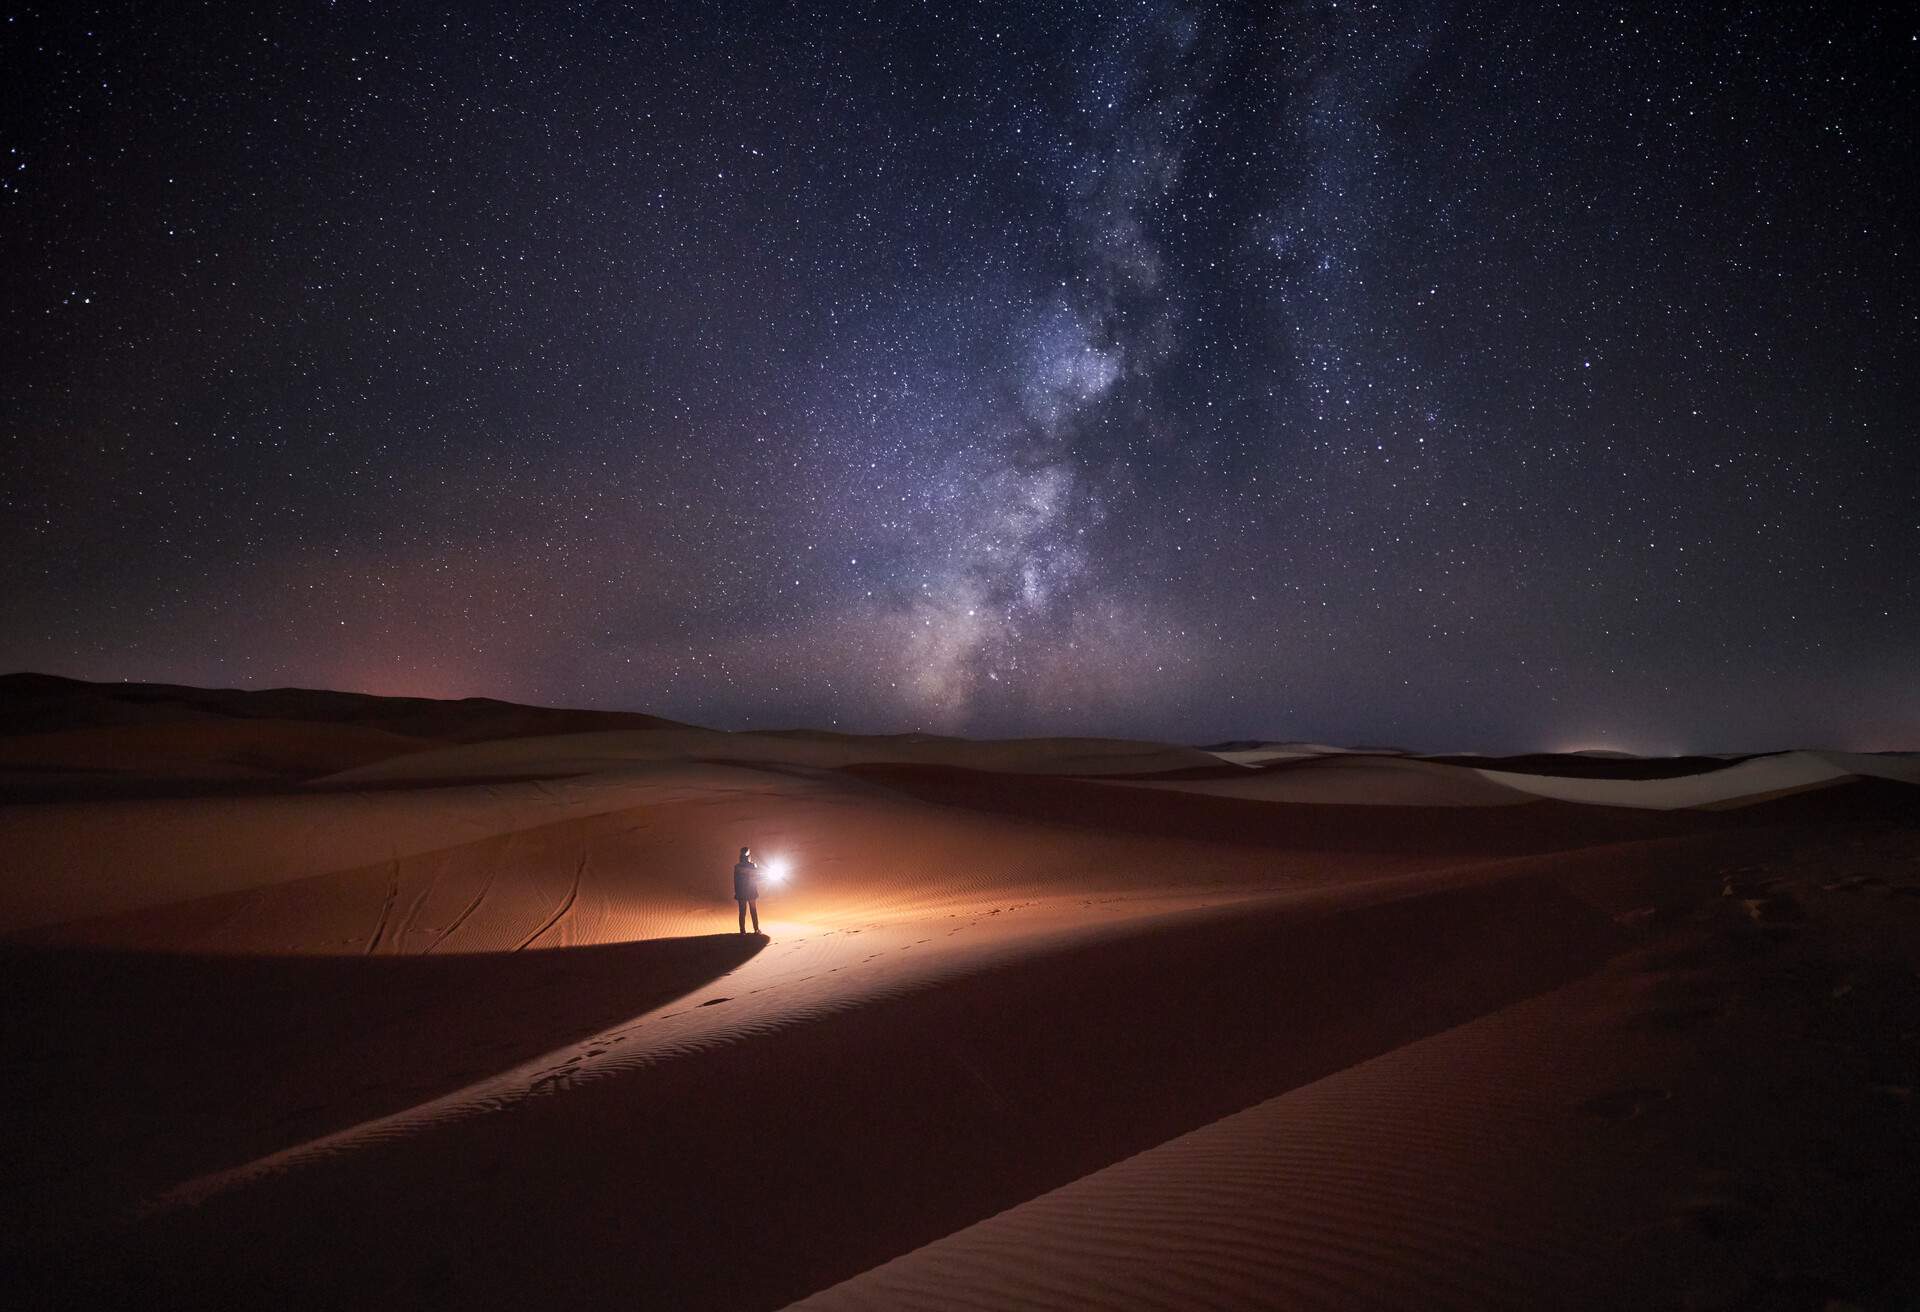 DEST_MOROCCO_MERZOUGA_DESERT_PERSON_NIGHT_SKY_GettyImages-1147346778